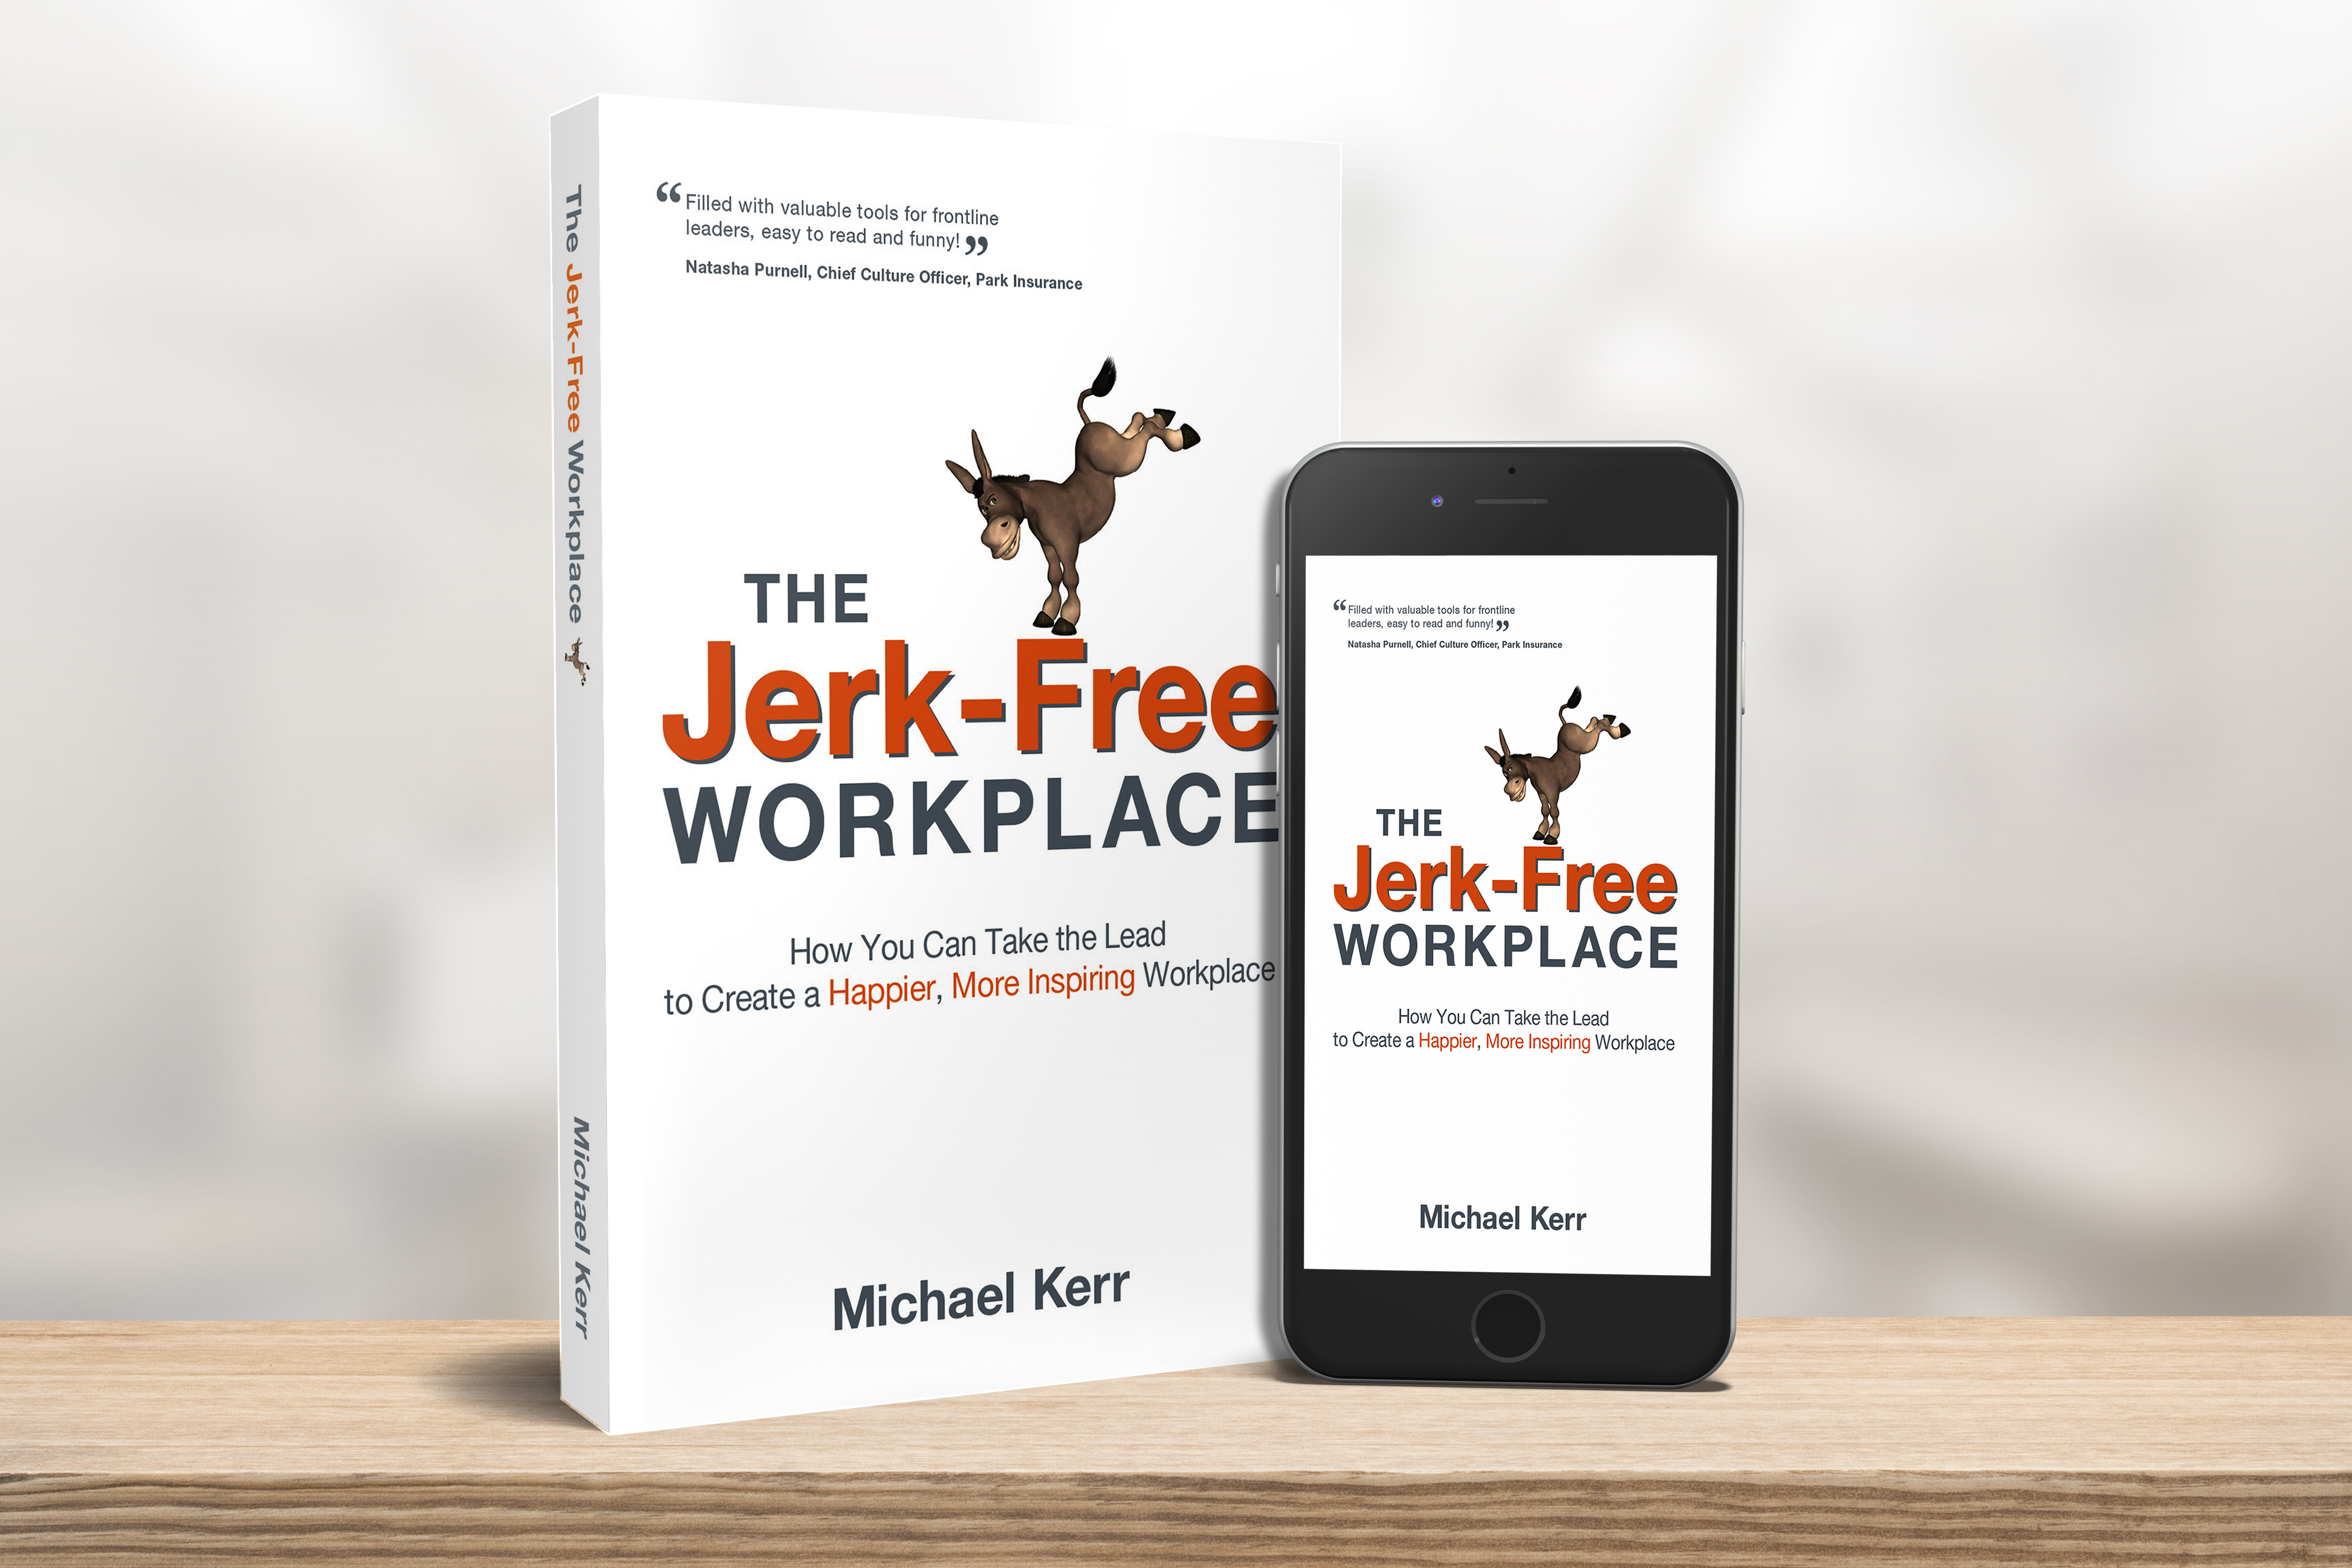 The Jerk-Free Workplace: How You Can Take the Lead to Create a Happier, More Inspiring Workplace